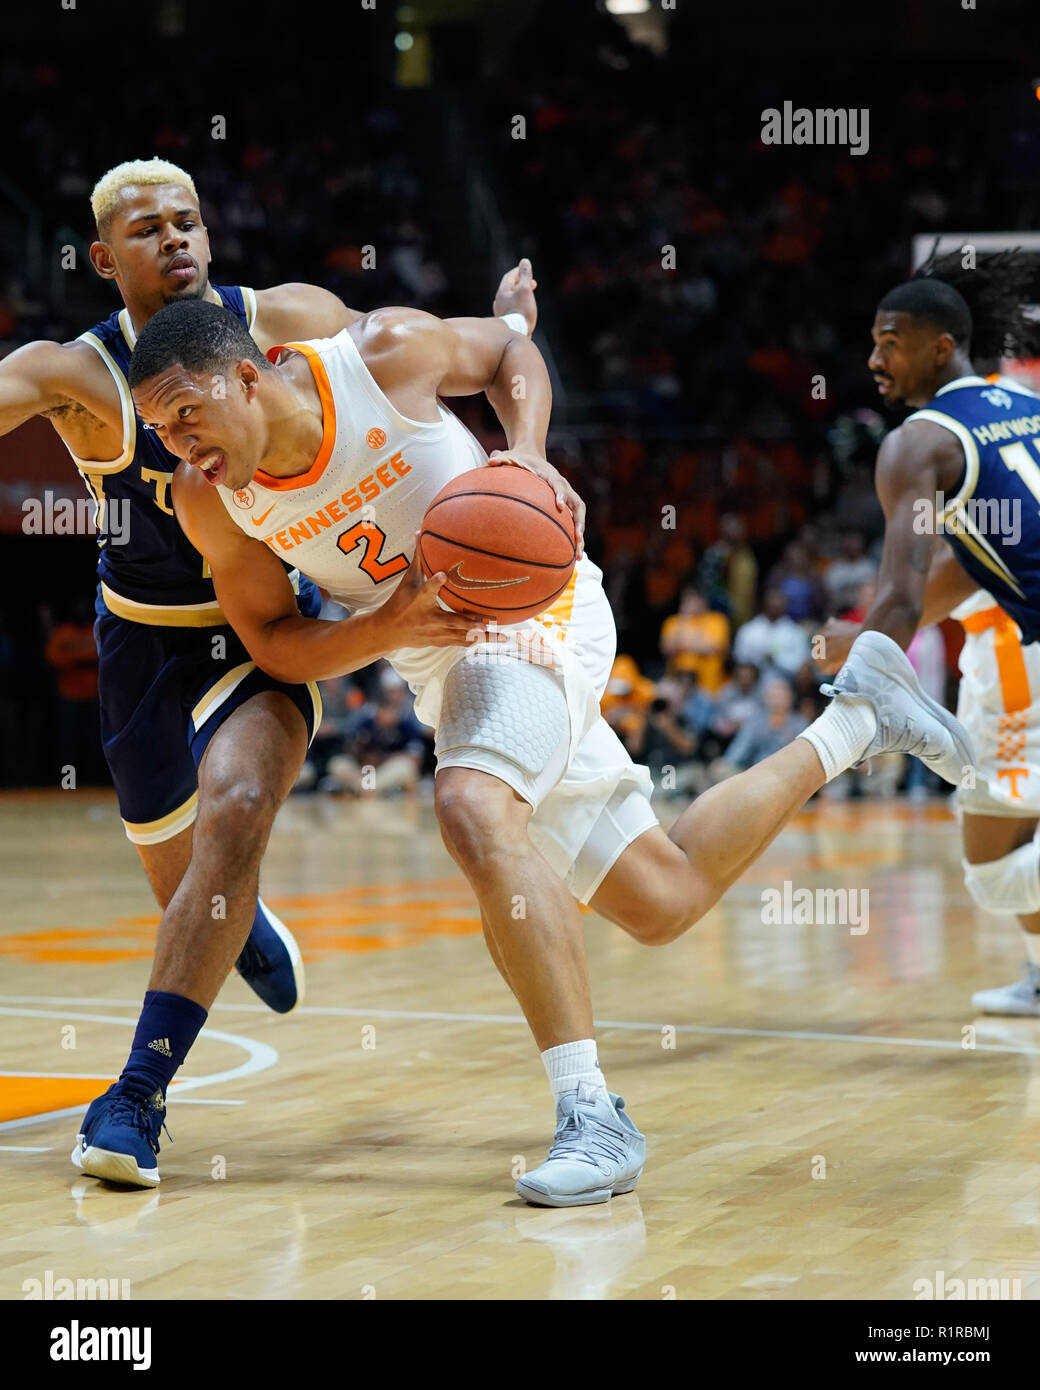 Knoxville, Tennessee, USA. 13th Nov, 2018. November 13, 2018: Grant Williams #2 of the Tennessee Volunteers drives to the basket against Brandon Alston #4 of the Georgia Tech Yellow Jackets during the NCAA basketball game between the University of Tennessee Volunteers and the Georgia Tech Yellow Jackets at Thompson Boling Arena in Knoxville TN Tim Gangloff/CSM Credit: Cal Sport Media/Alamy Live News Stock Photo